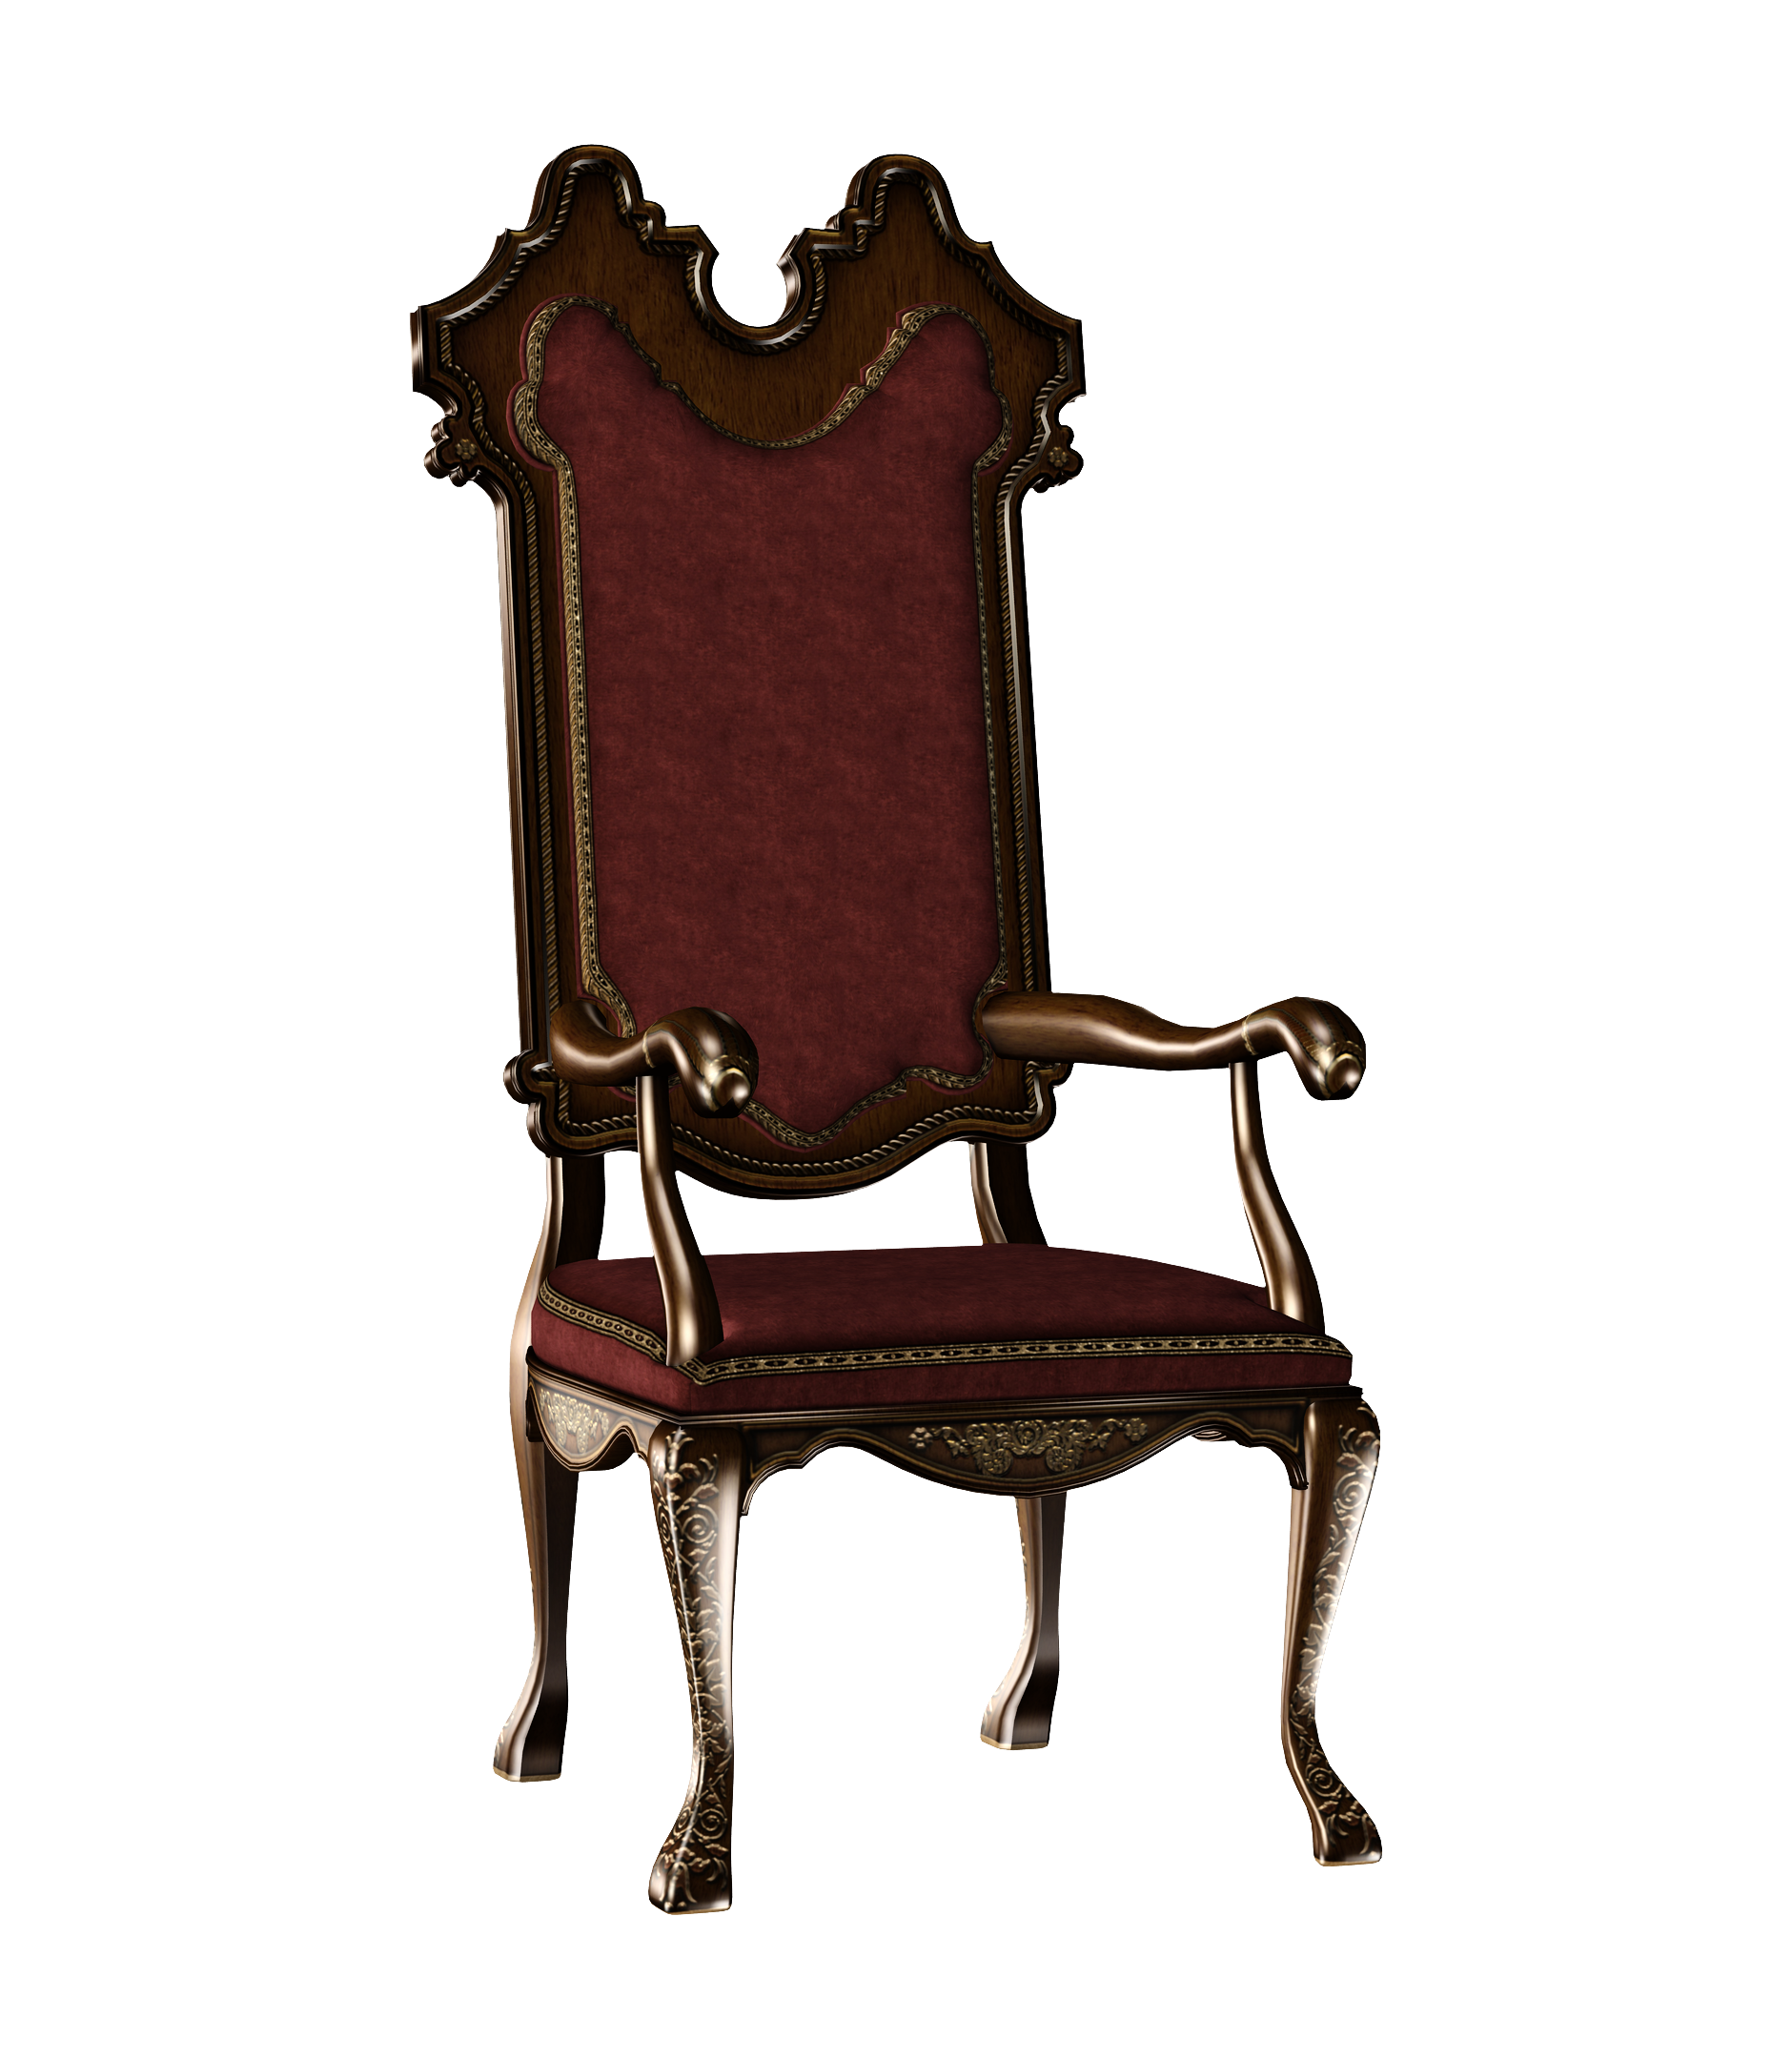 Antique Table Chair Seat HQ Image Free PNG PNG Image